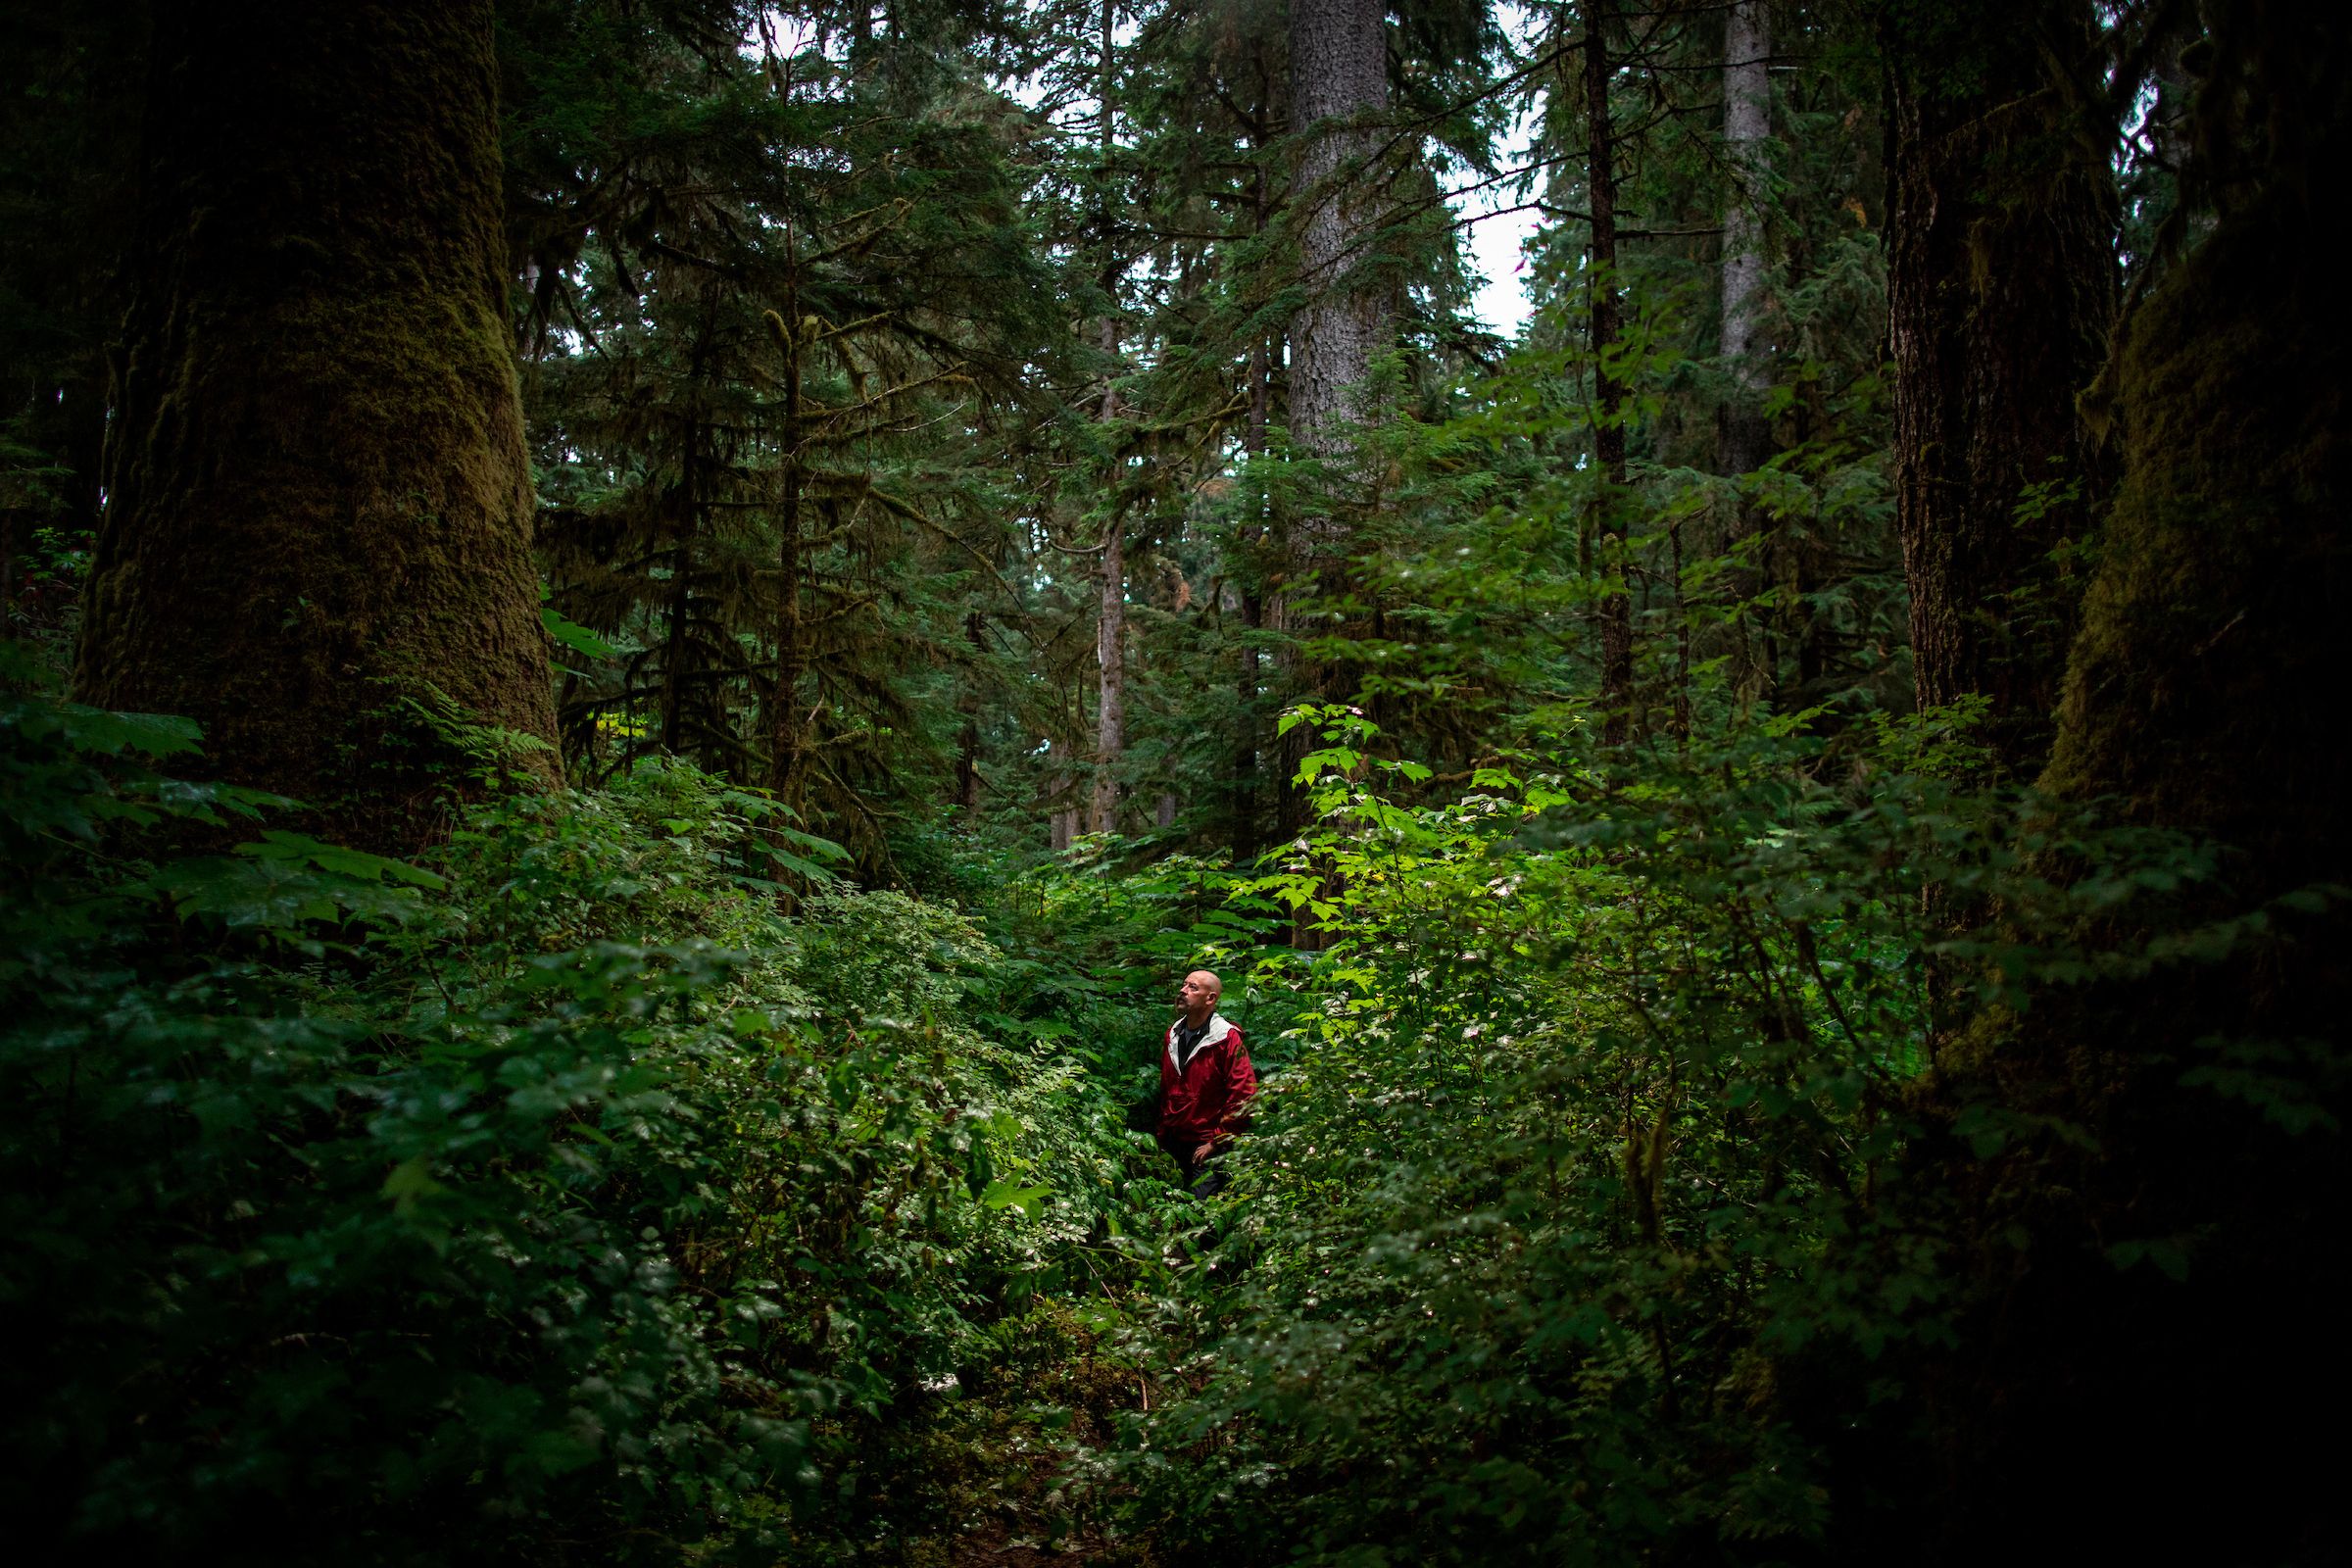 Retired State Trooper and local conservationist Bob Claus tours some of the last pristine old growth forest that remains on Prince of Wales Island, Alaska. Image by Joshua Cogan. United States, 2019.